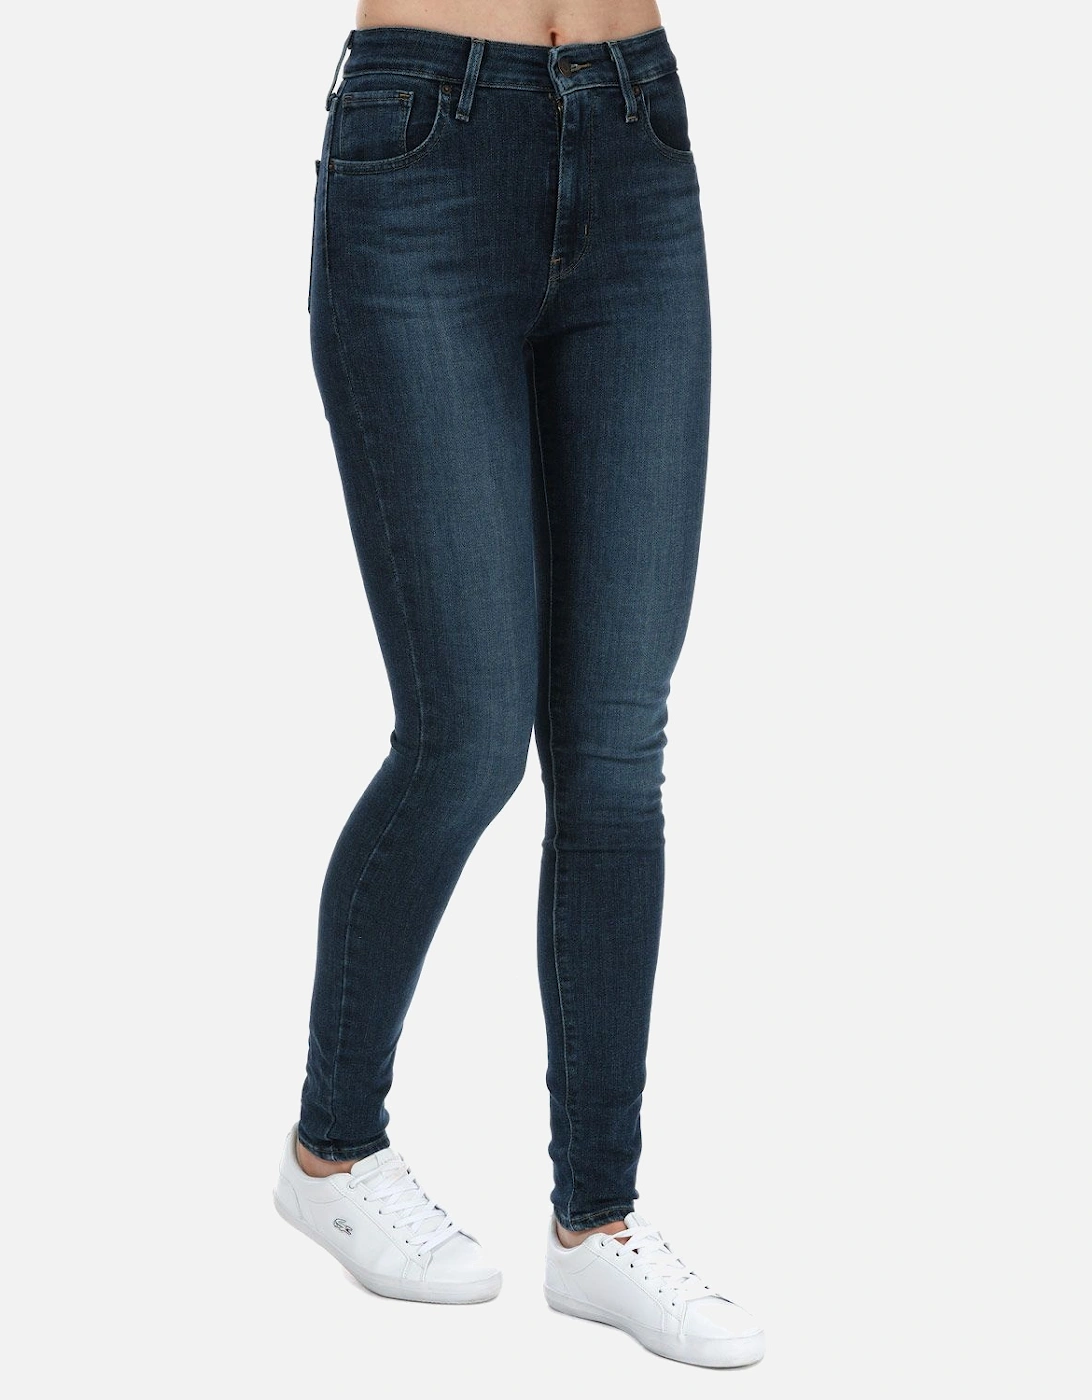 Womens 721 High Rise Skinny Jeans, 18 of 17